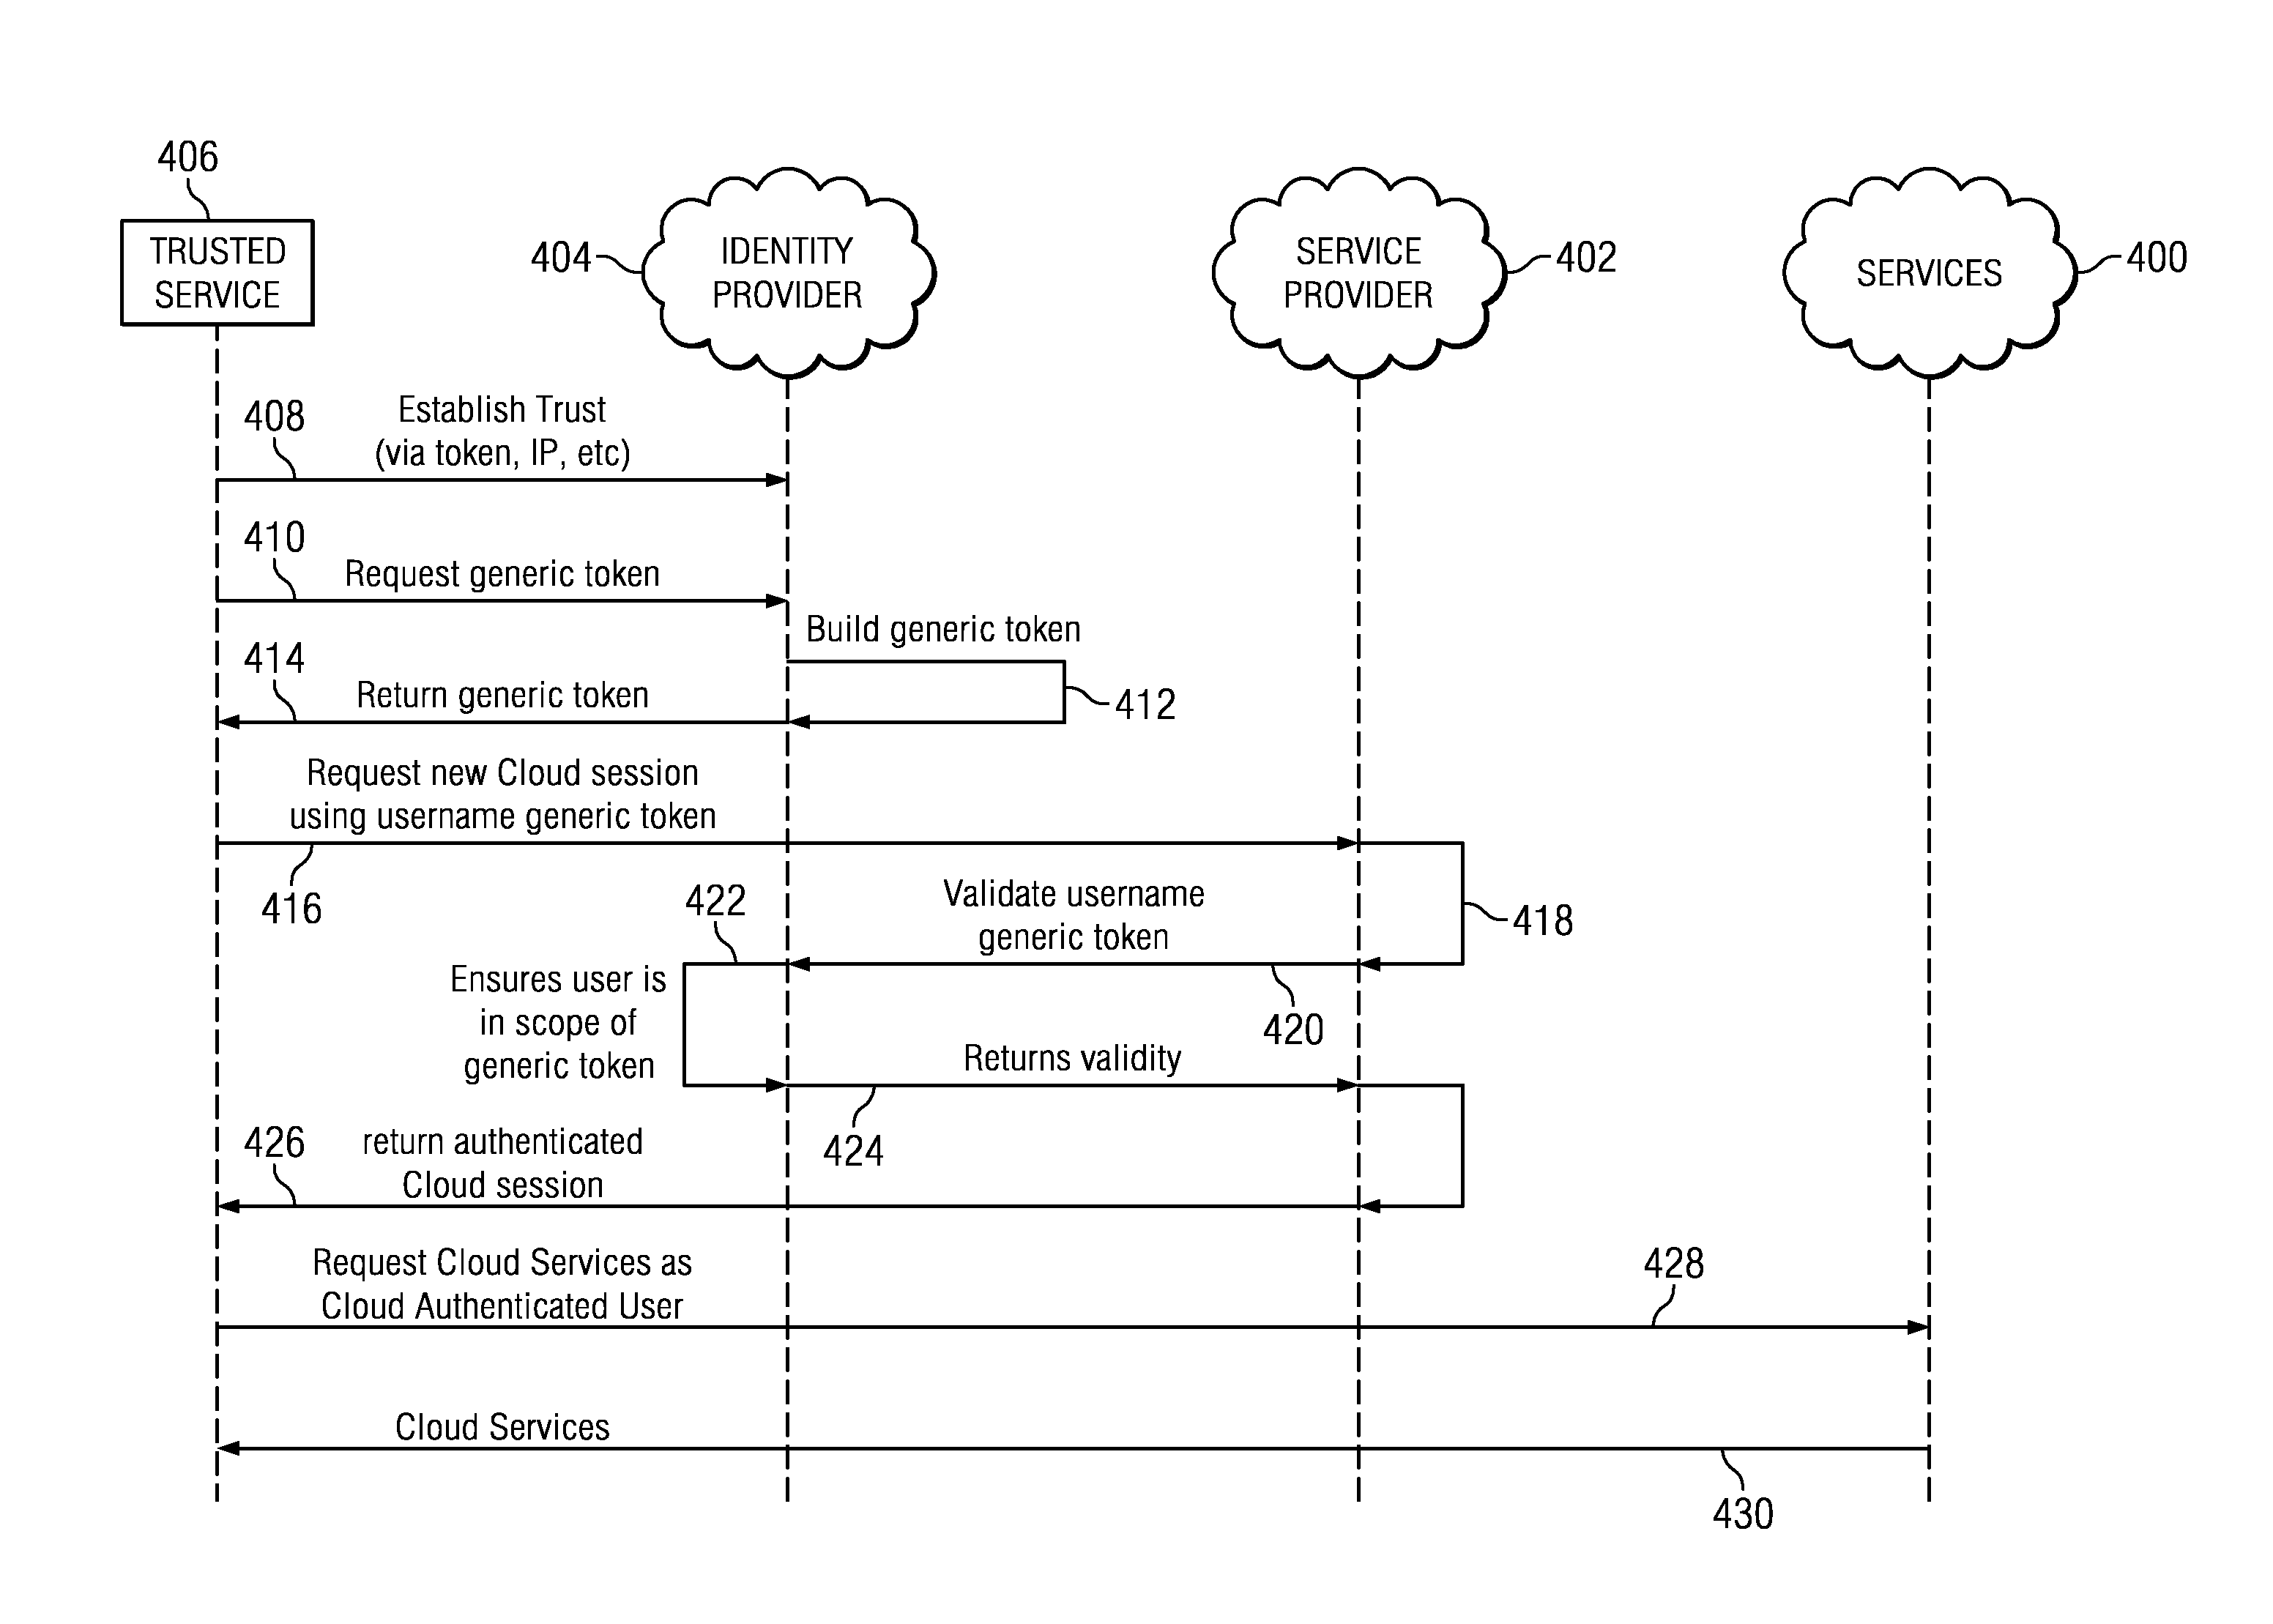 User impersonation/delegation in a token-based authentication system